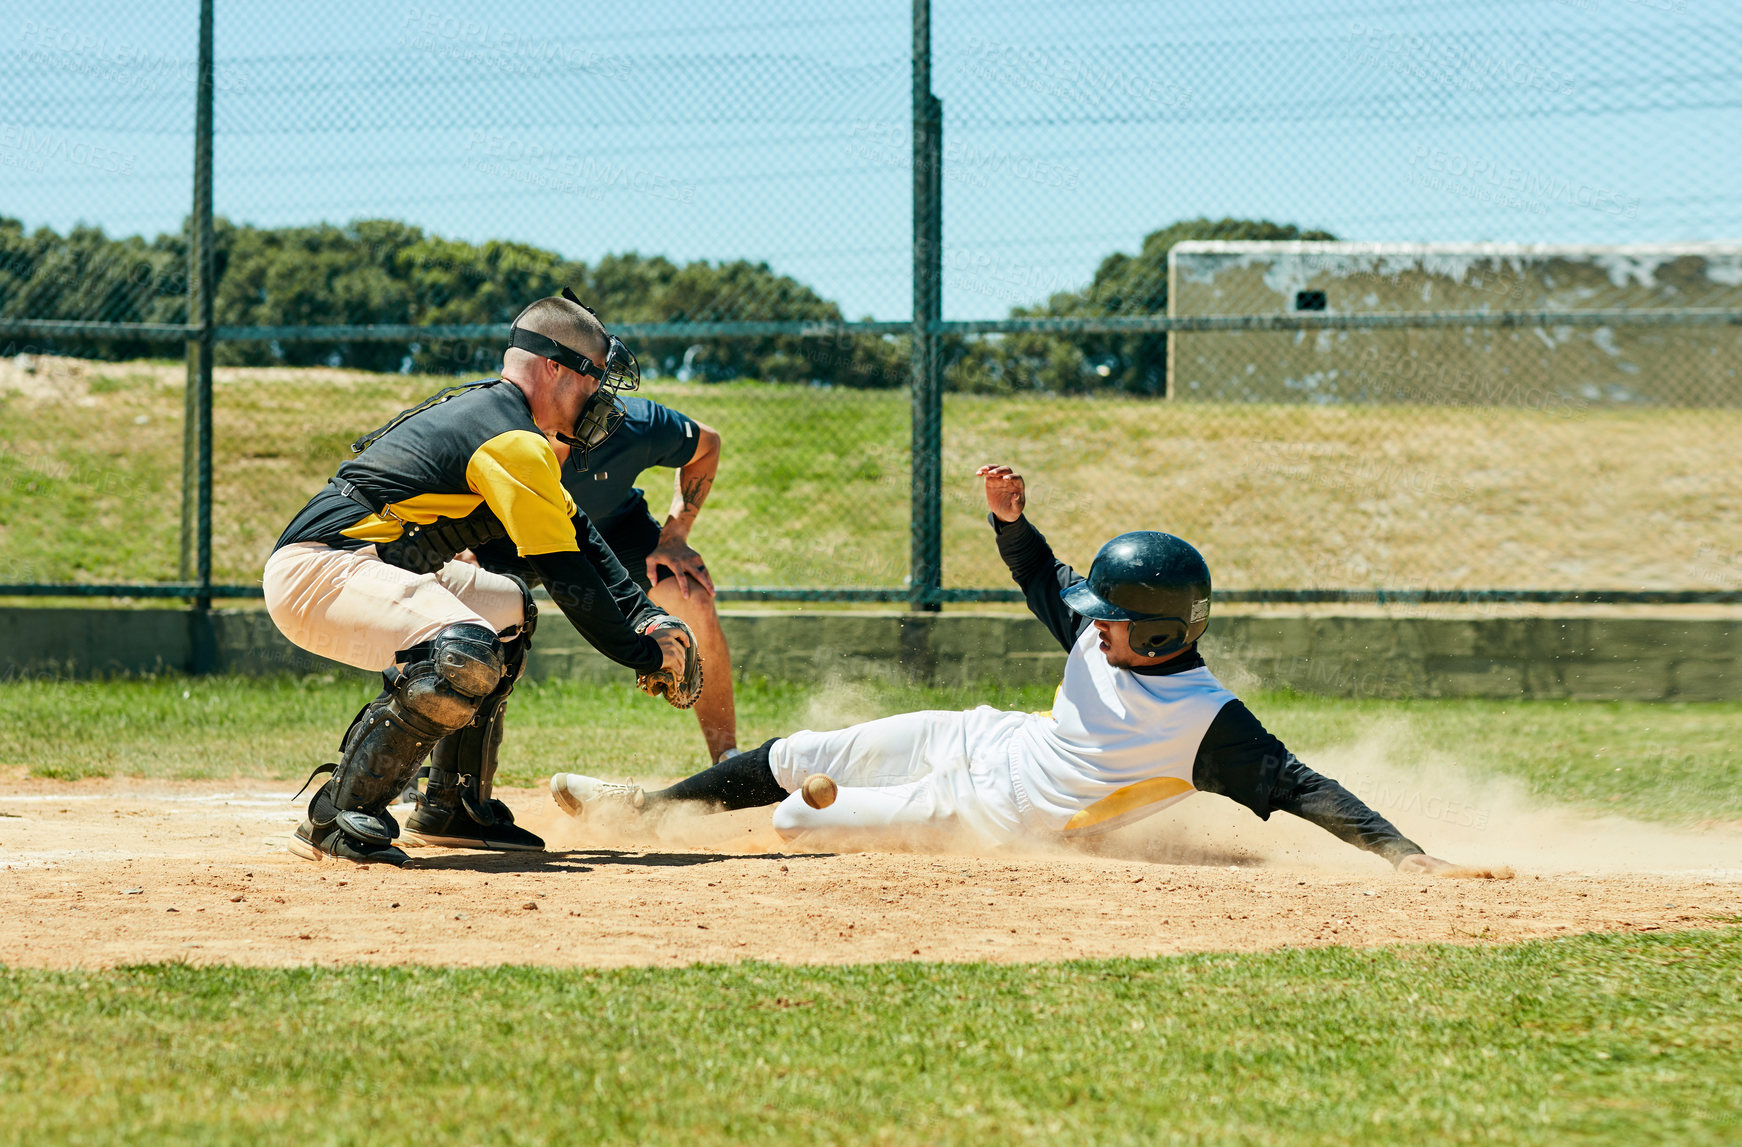 Buy stock photo Full length shot of a young baseball player reaching base during a match on the field